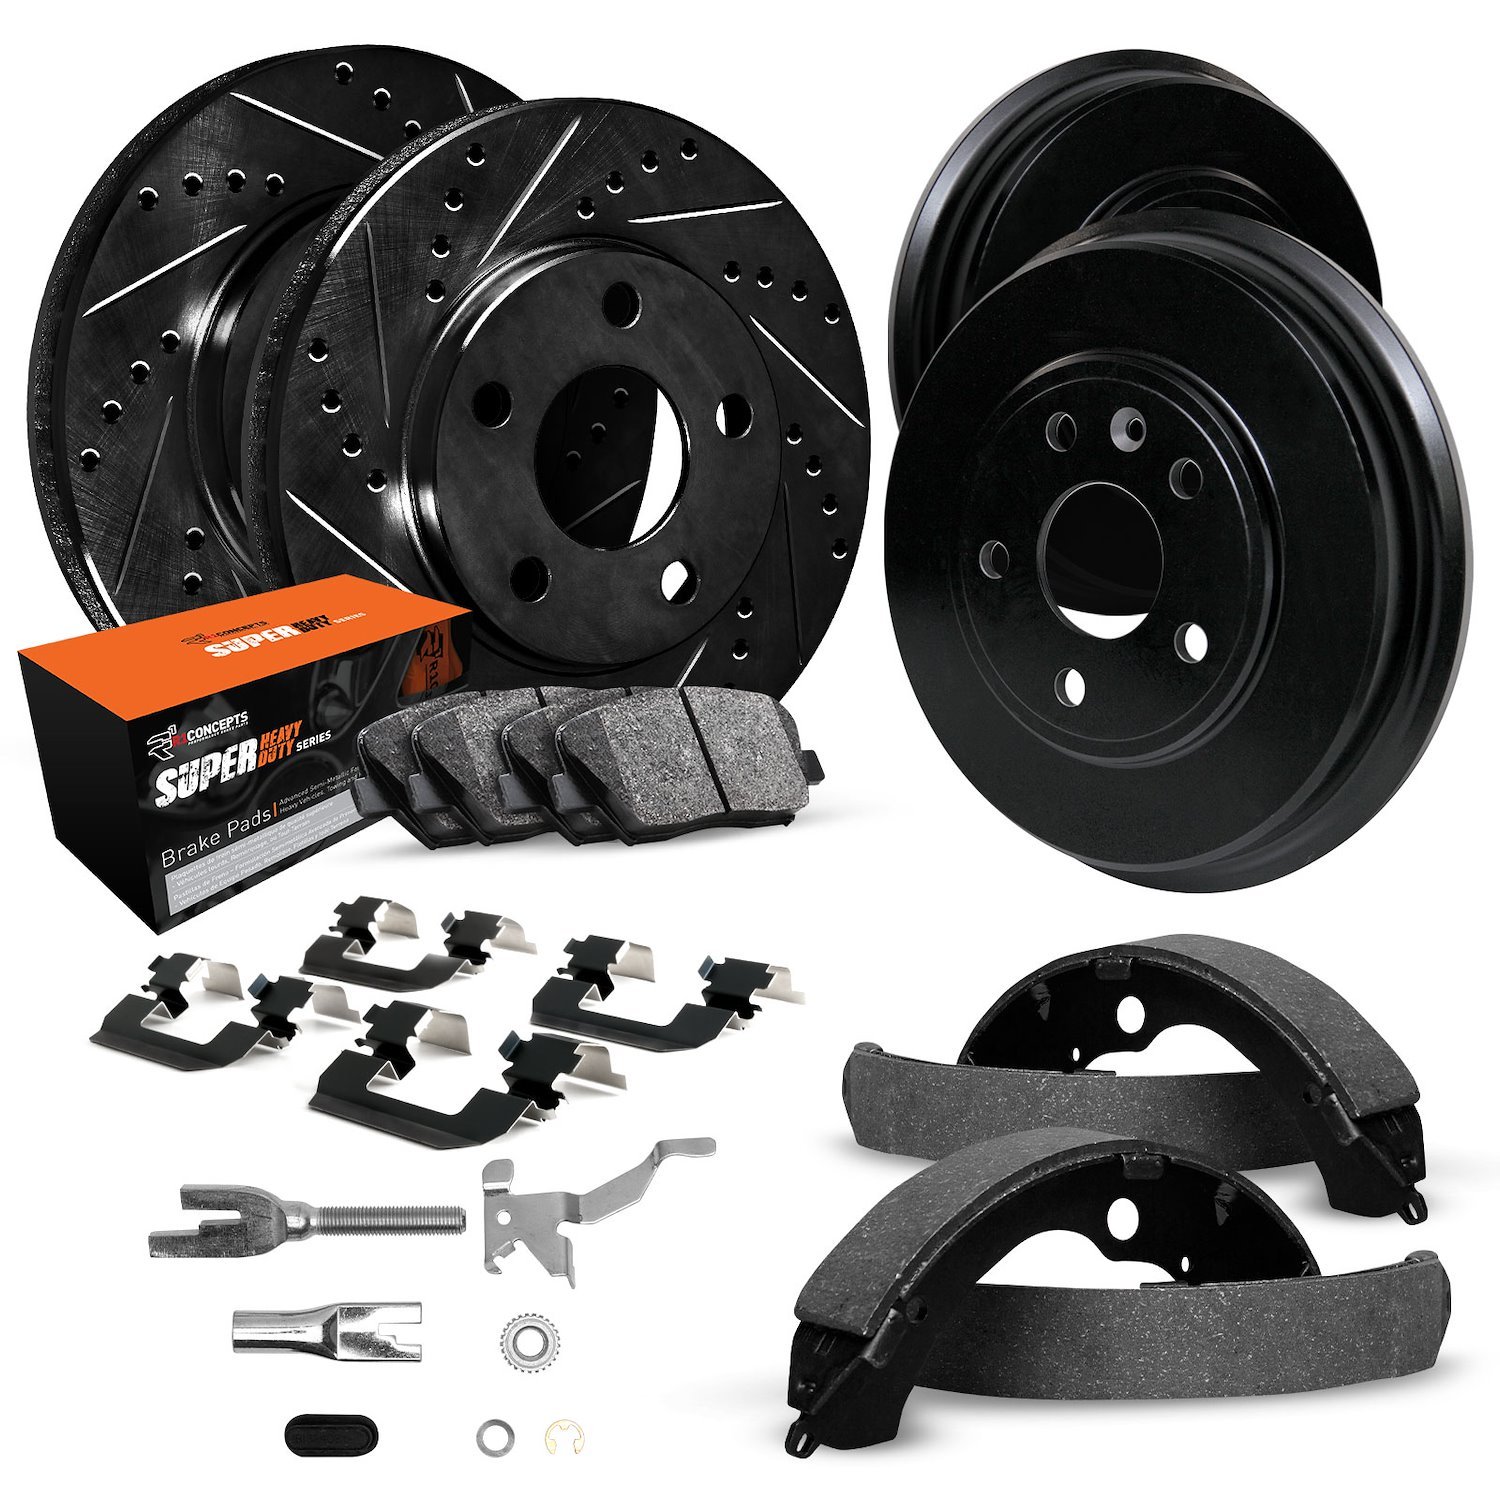 E-Line Drilled/Slotted Black Rotor & Drum Set w/Super-Duty Pads, Shoes, Hardware/Adjusters, 1989-1989 Ford/Lincoln/Mercury/Mazda